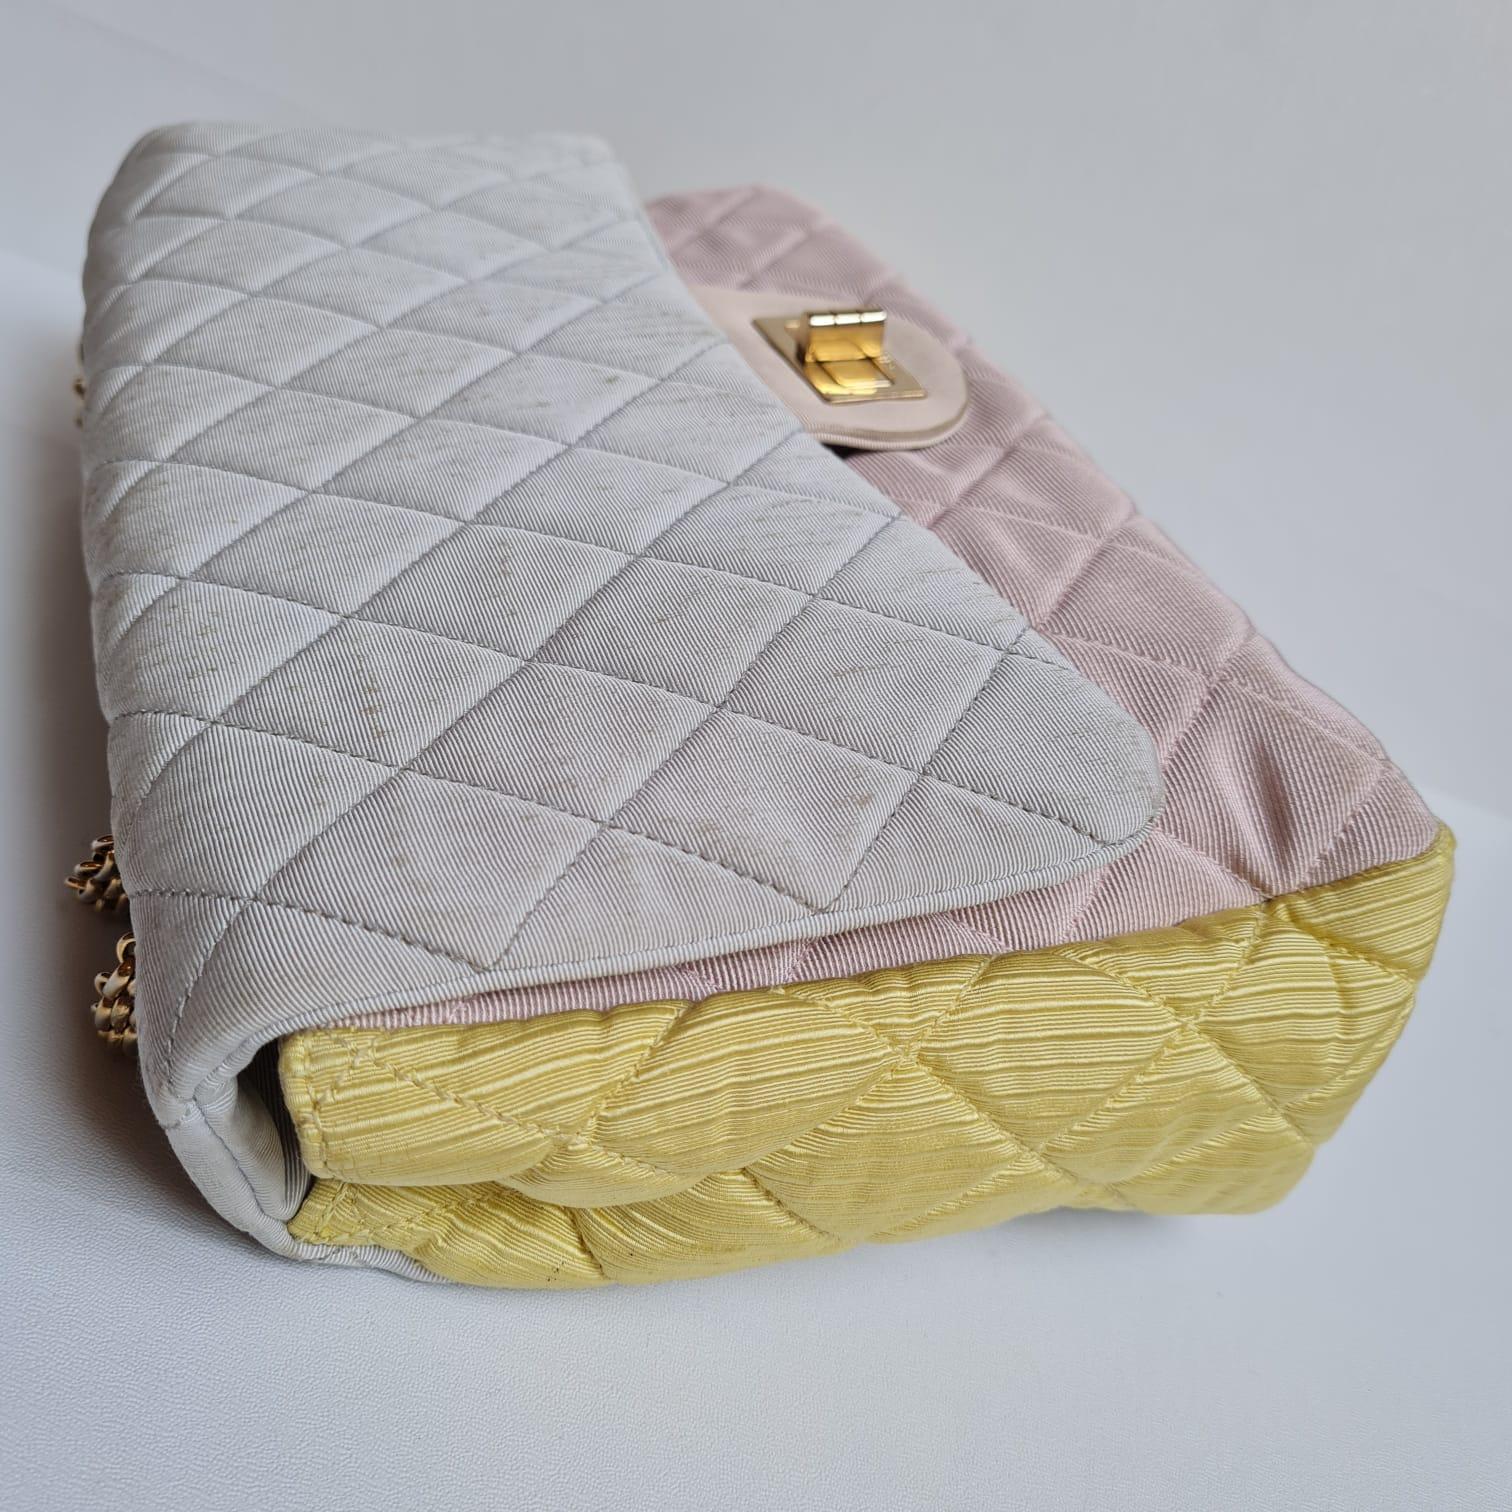 Chanel Pastel Tricolor 2.55 Canvas Quilted 227 Reissue Flap Bag For Sale 14